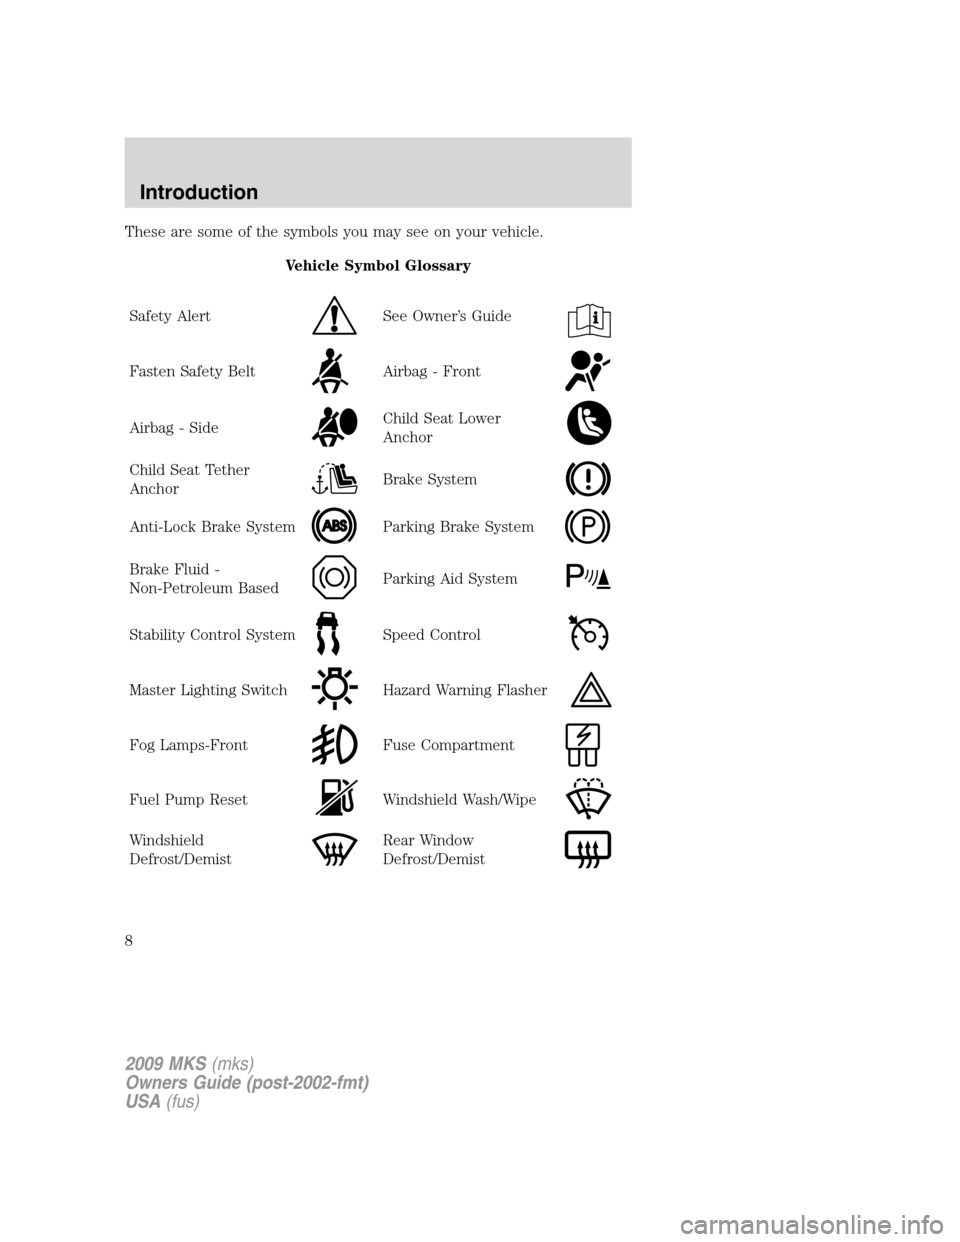 LINCOLN MKS 2009  Owners Manual These are some of the symbols you may see on your vehicle.
Vehicle Symbol Glossary
Safety Alert
See Owner’s Guide
Fasten Safety BeltAirbag - Front
Airbag - SideChild Seat Lower
Anchor
Child Seat Tet